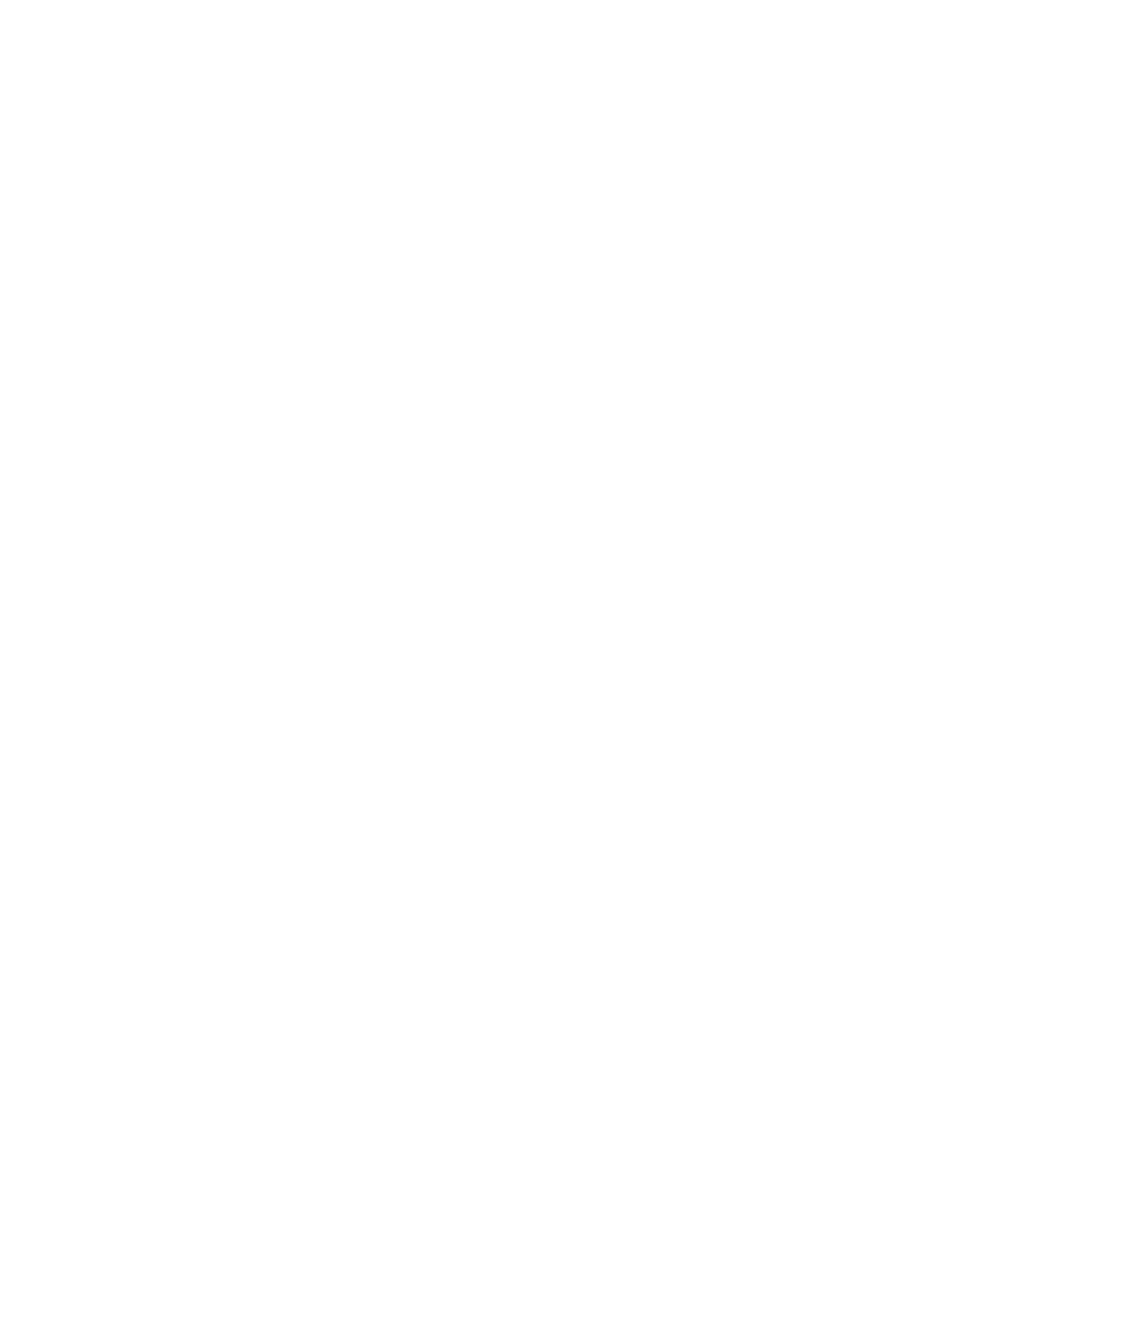 The Coach Makers Arms, London Pubs